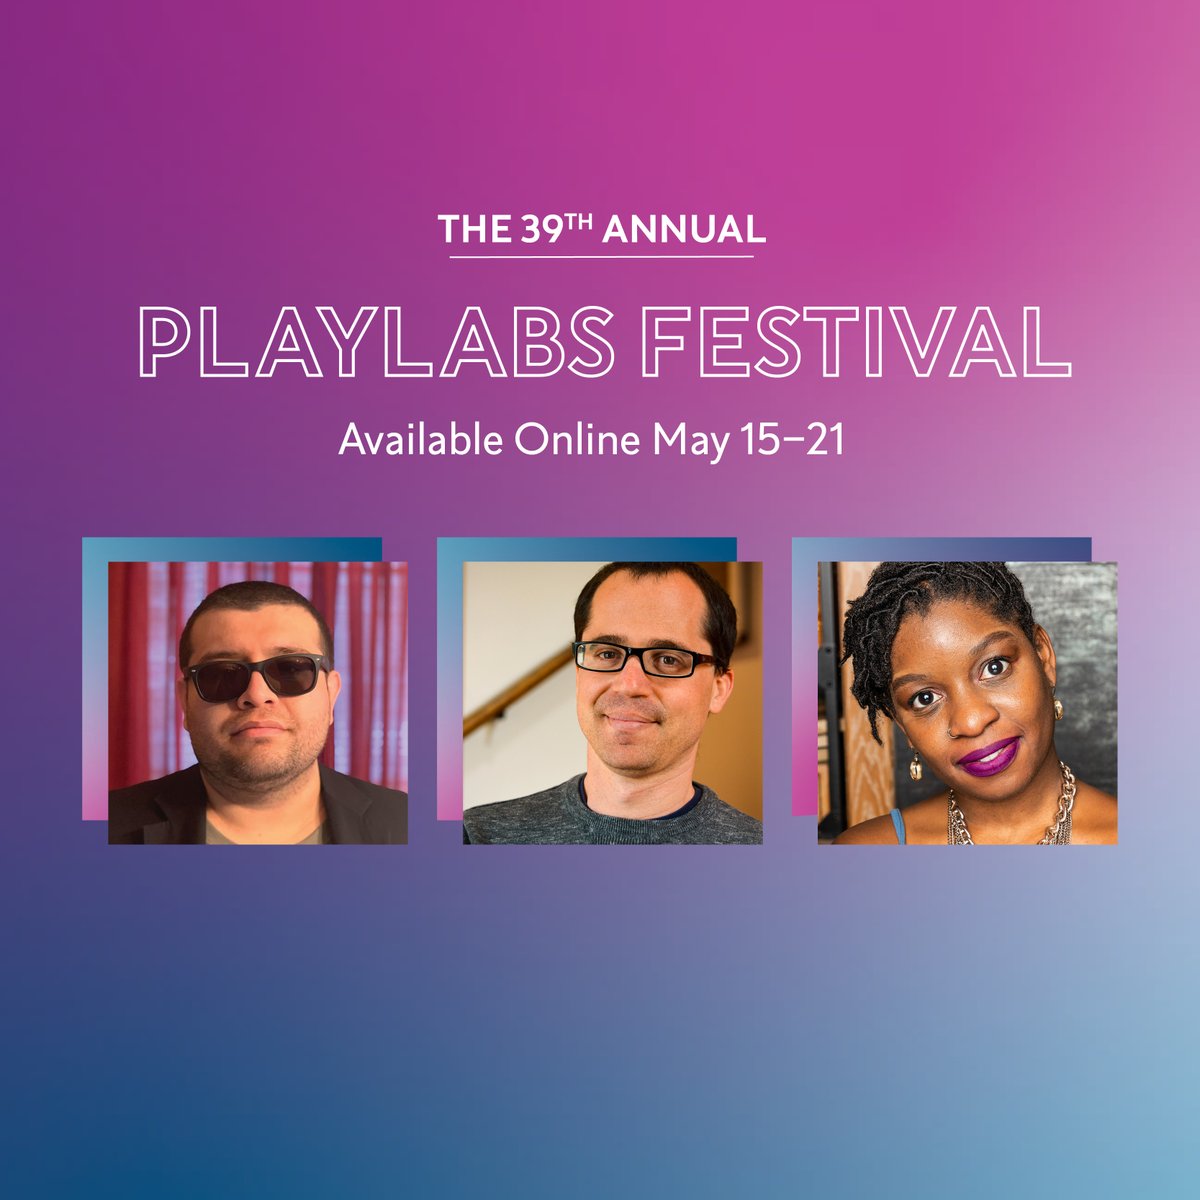 All performances from our Playlabs Festival will be available online from May 15–21! Join us at the comfort of your own home. RSVP to our online stream on our website.

pwcenter.org/playlabs-festi…